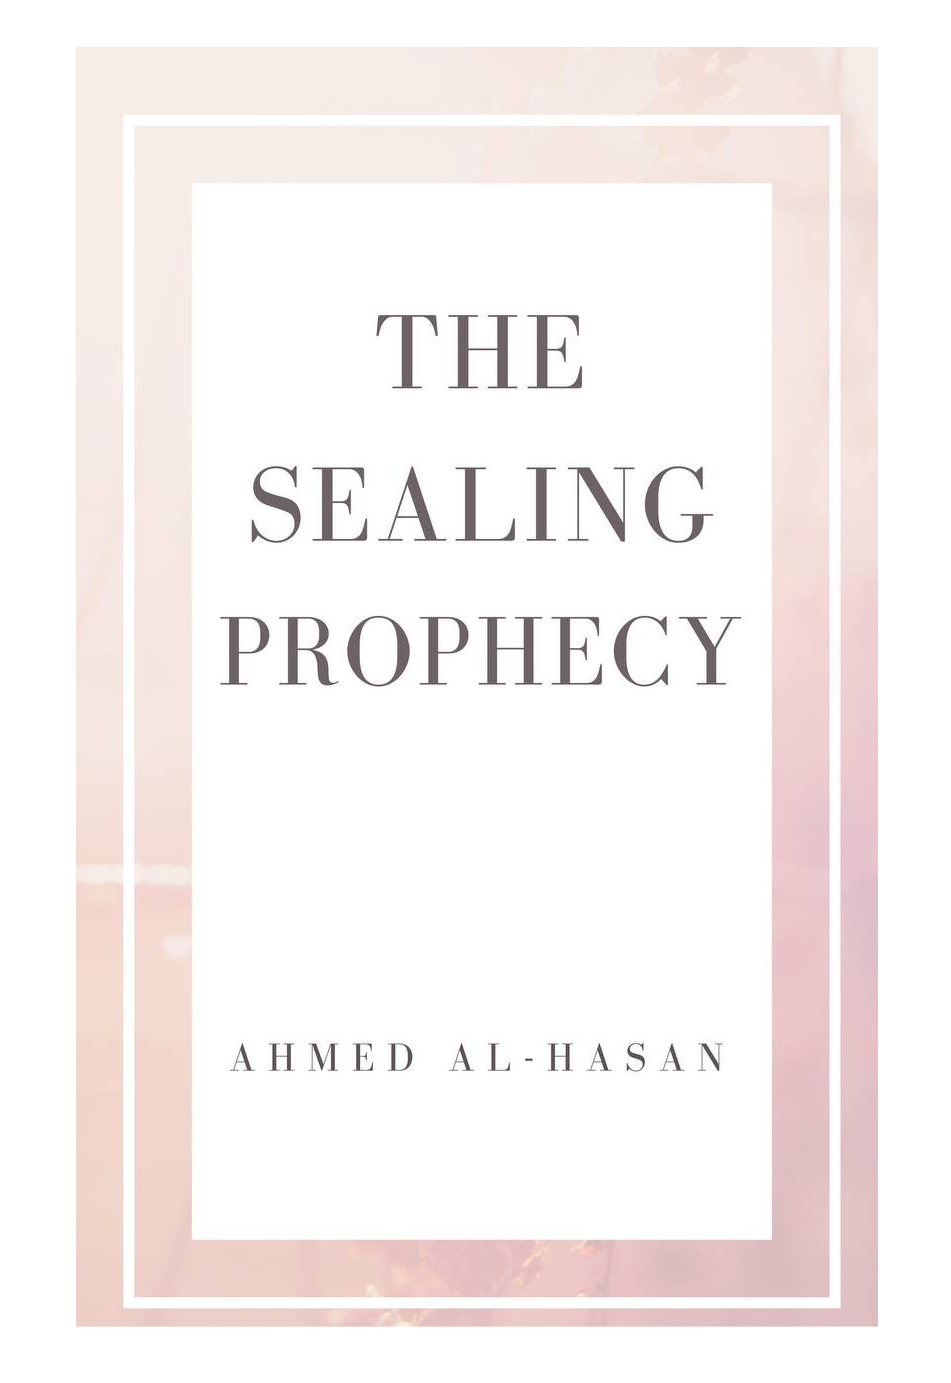 The Sealing Prophecy